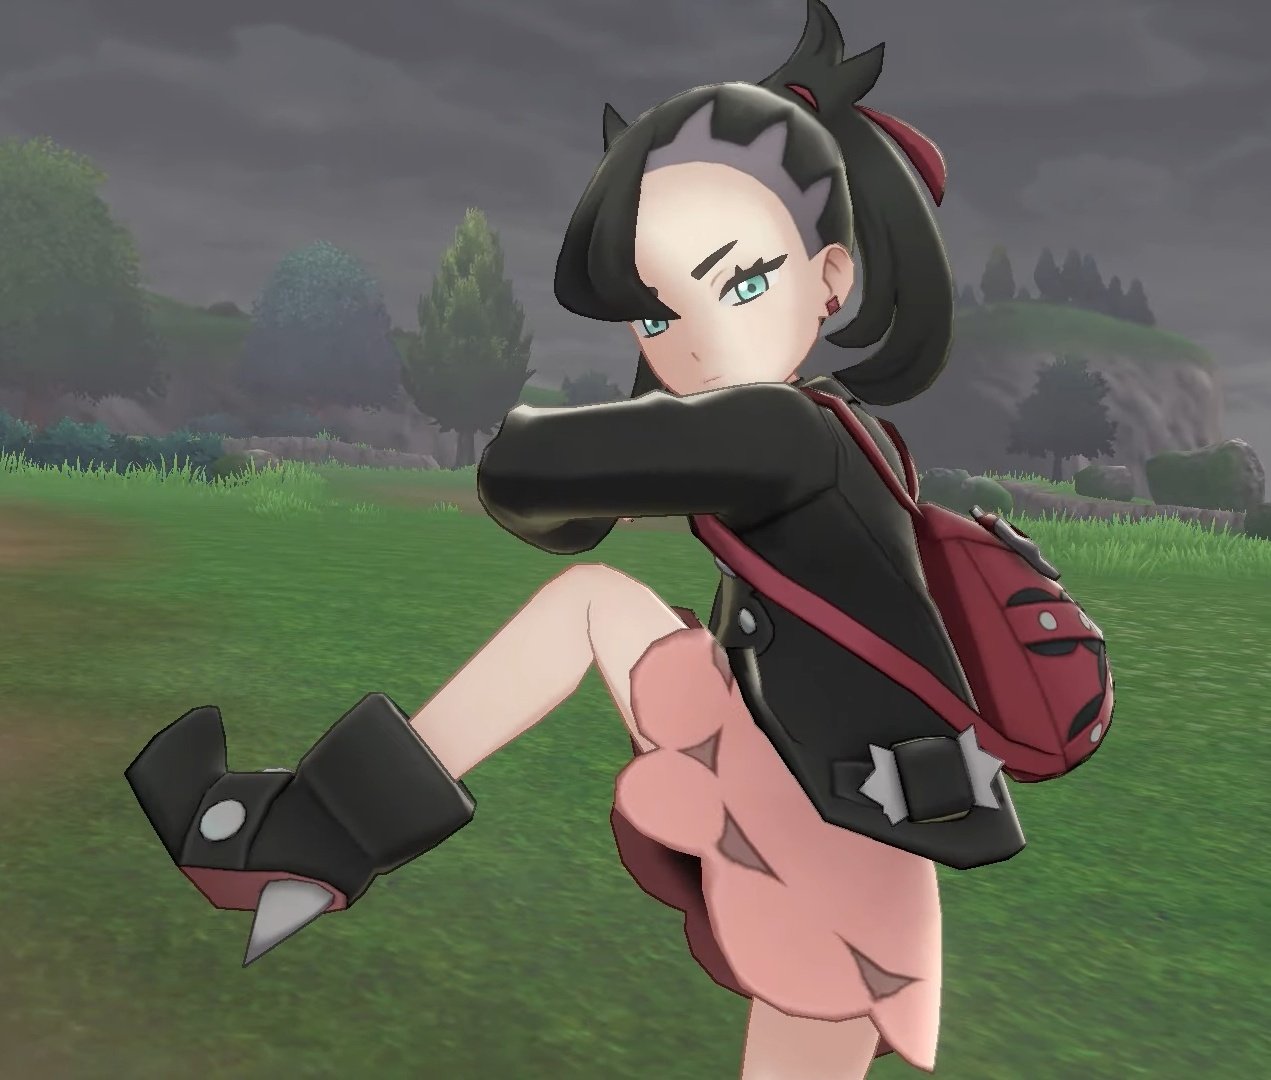 53. Gamers: Step on me Marnie: With pleasure.WHOEVER GETS STEPPED ON NEEDS ...